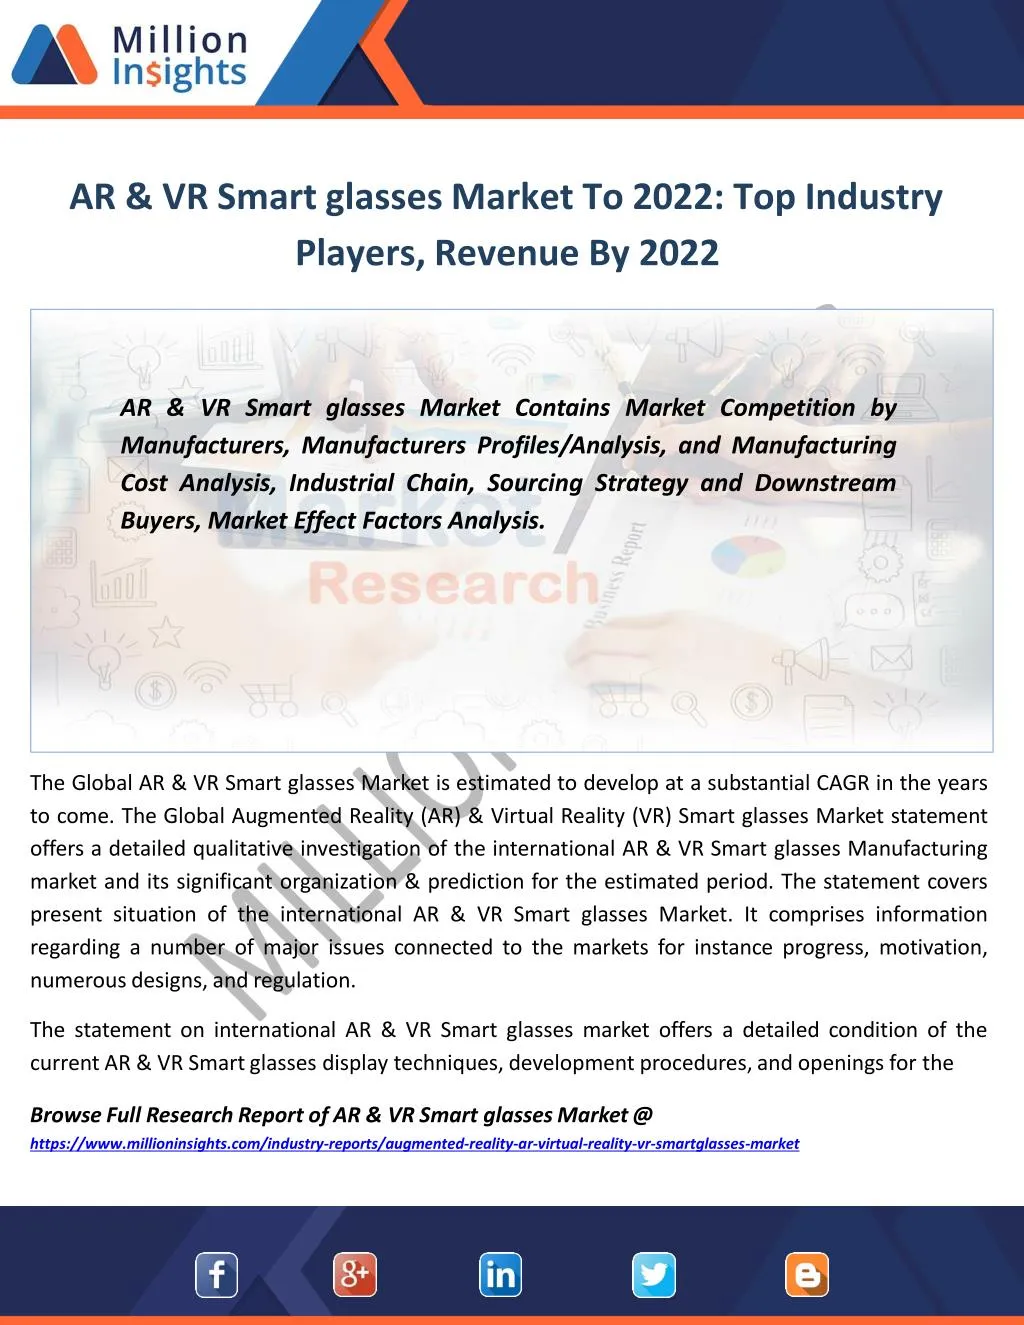 ar vr smart glasses market to 2022 top industry players revenue by 2022